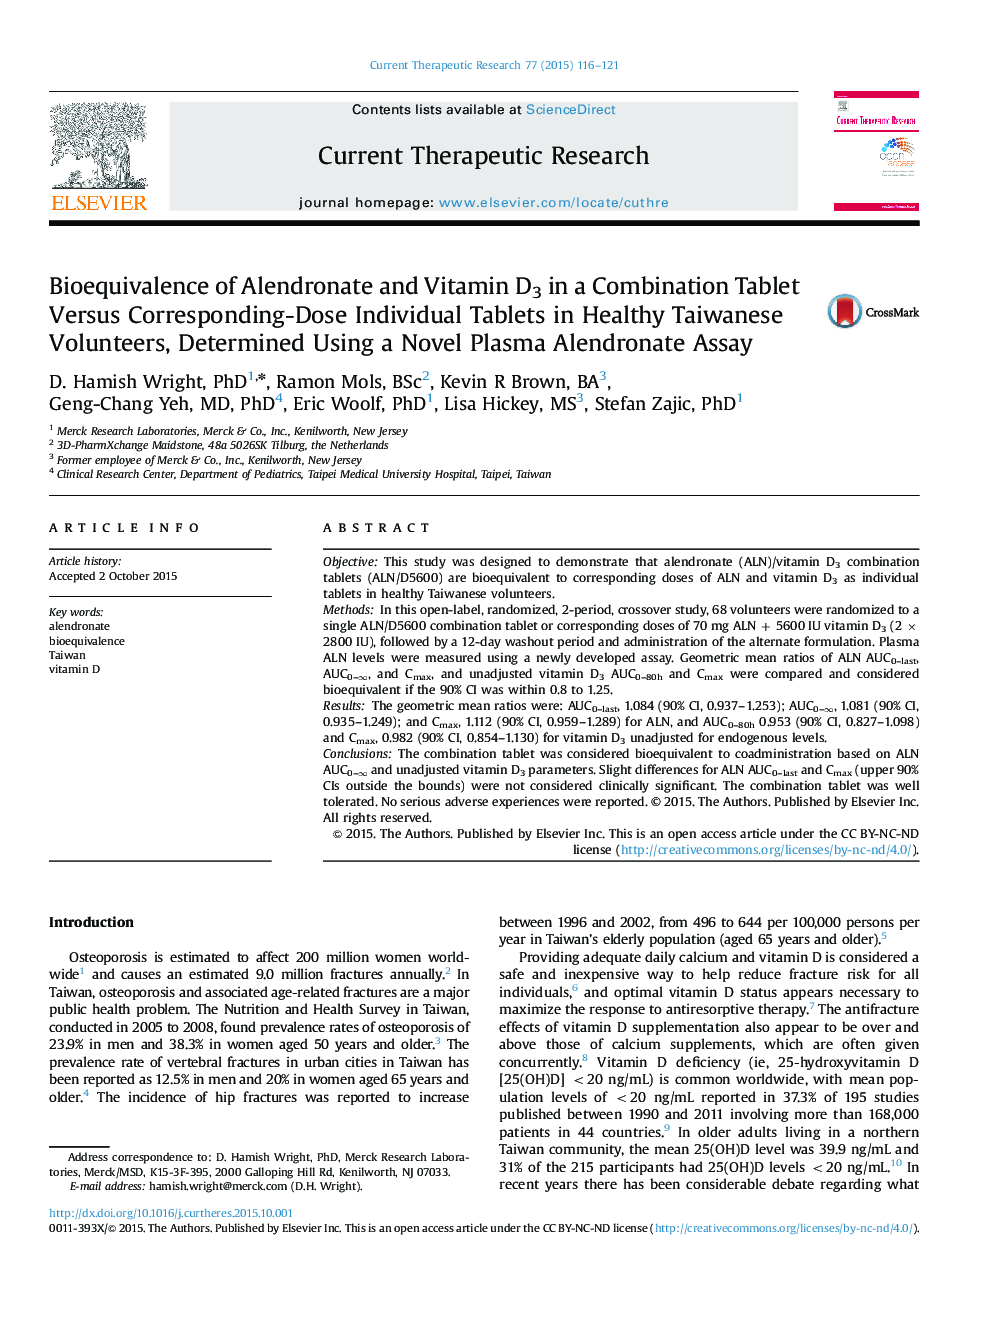 Bioequivalence of Alendronate and Vitamin D3 in a Combination Tablet Versus Corresponding-Dose Individual Tablets in Healthy Taiwanese Volunteers, Determined Using a Novel Plasma Alendronate Assay